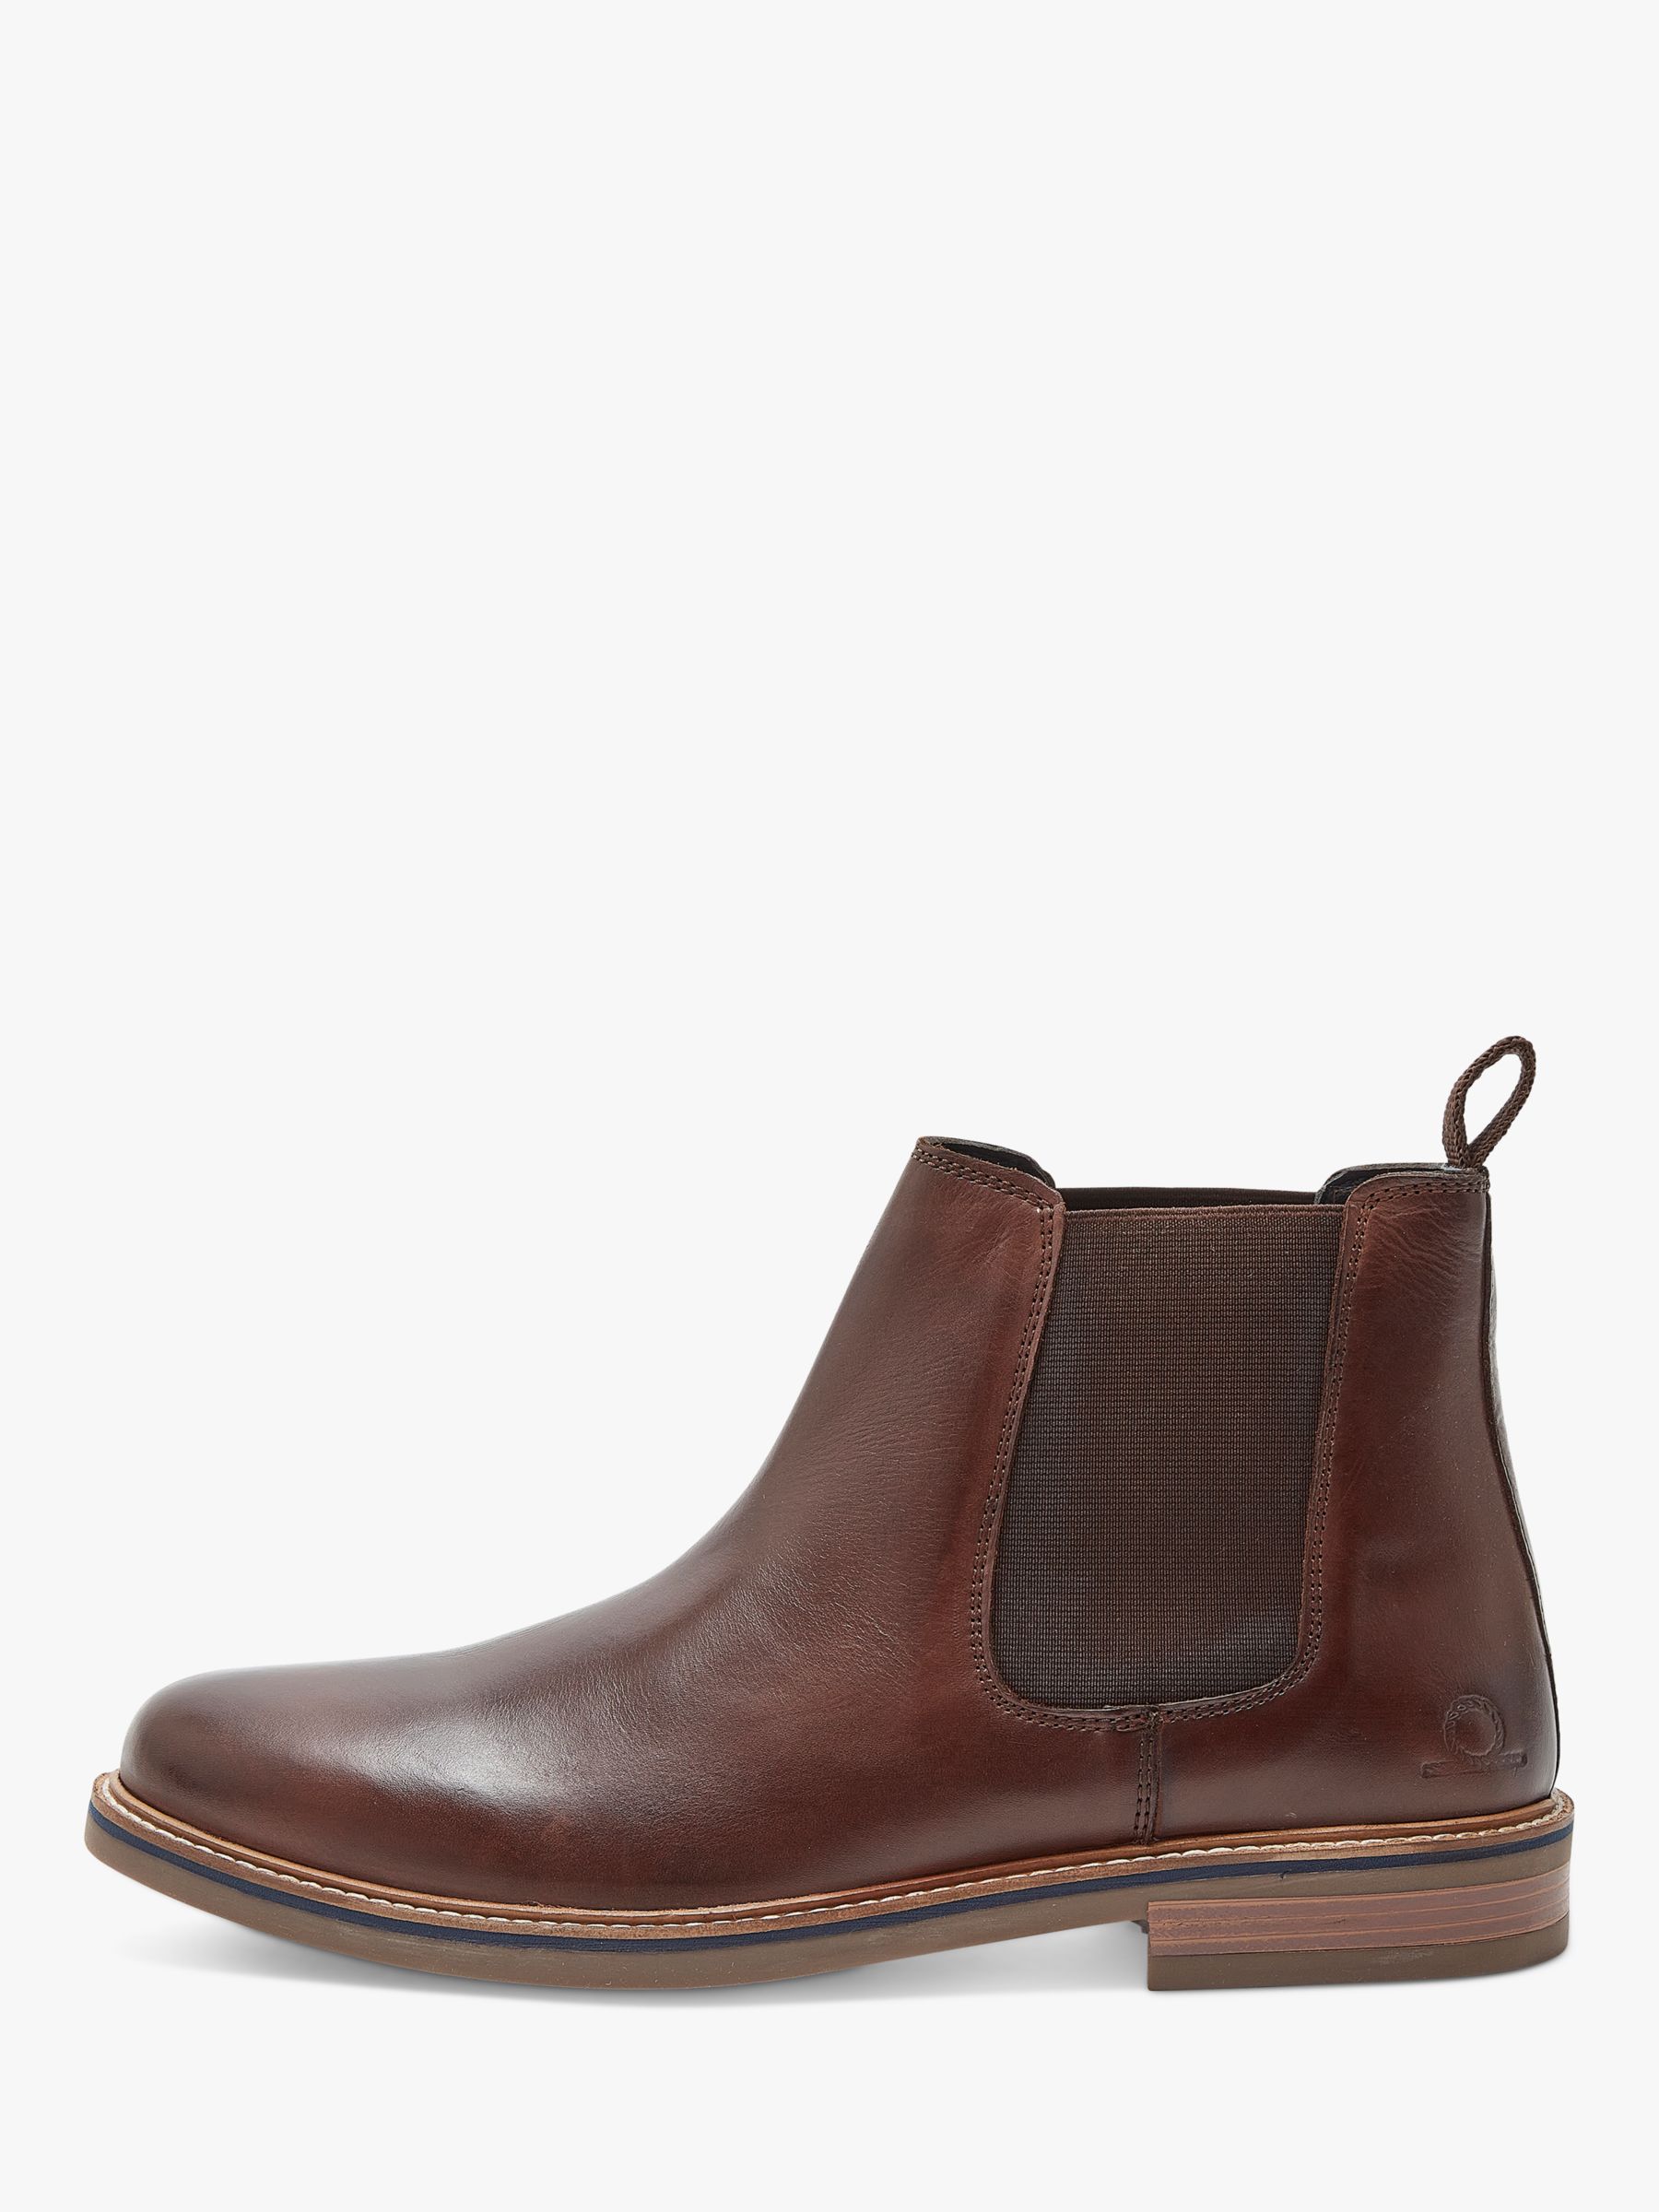 Chatham Scafell Chelsea Boots, Brown at John Lewis & Partners